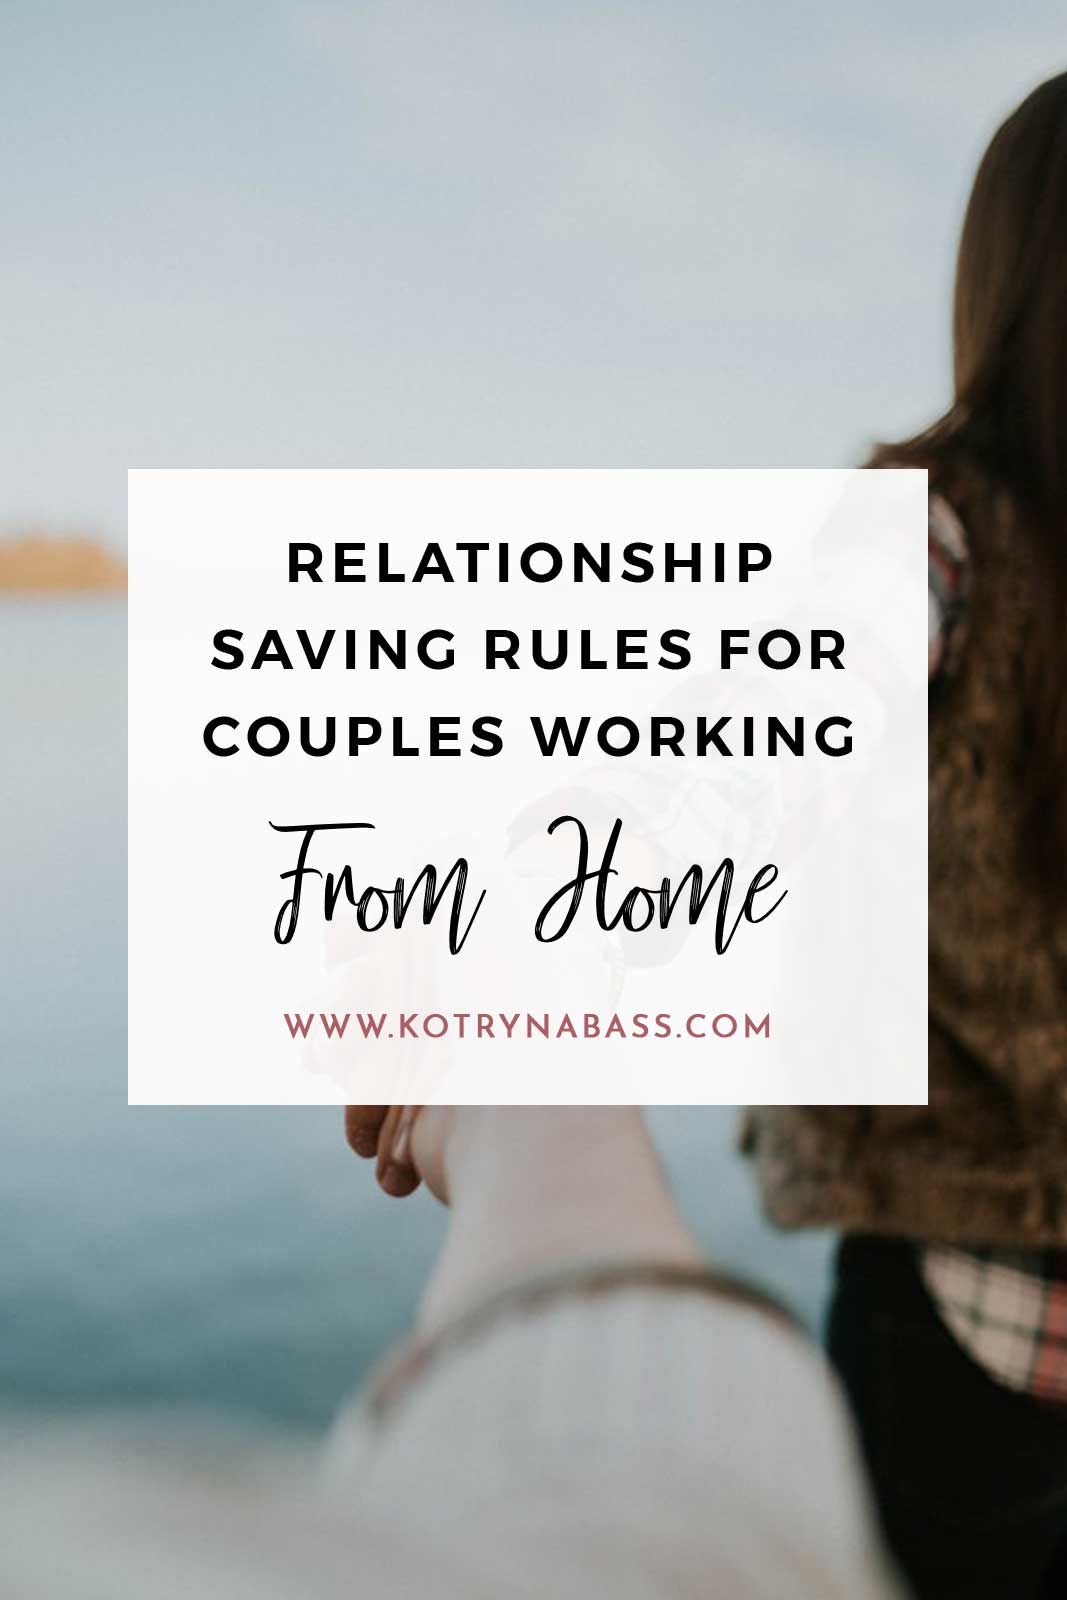 There are various ways to keep that spark even when you spend 24 hours a day together and let me share with you what proved to work for my partner & I over the years.